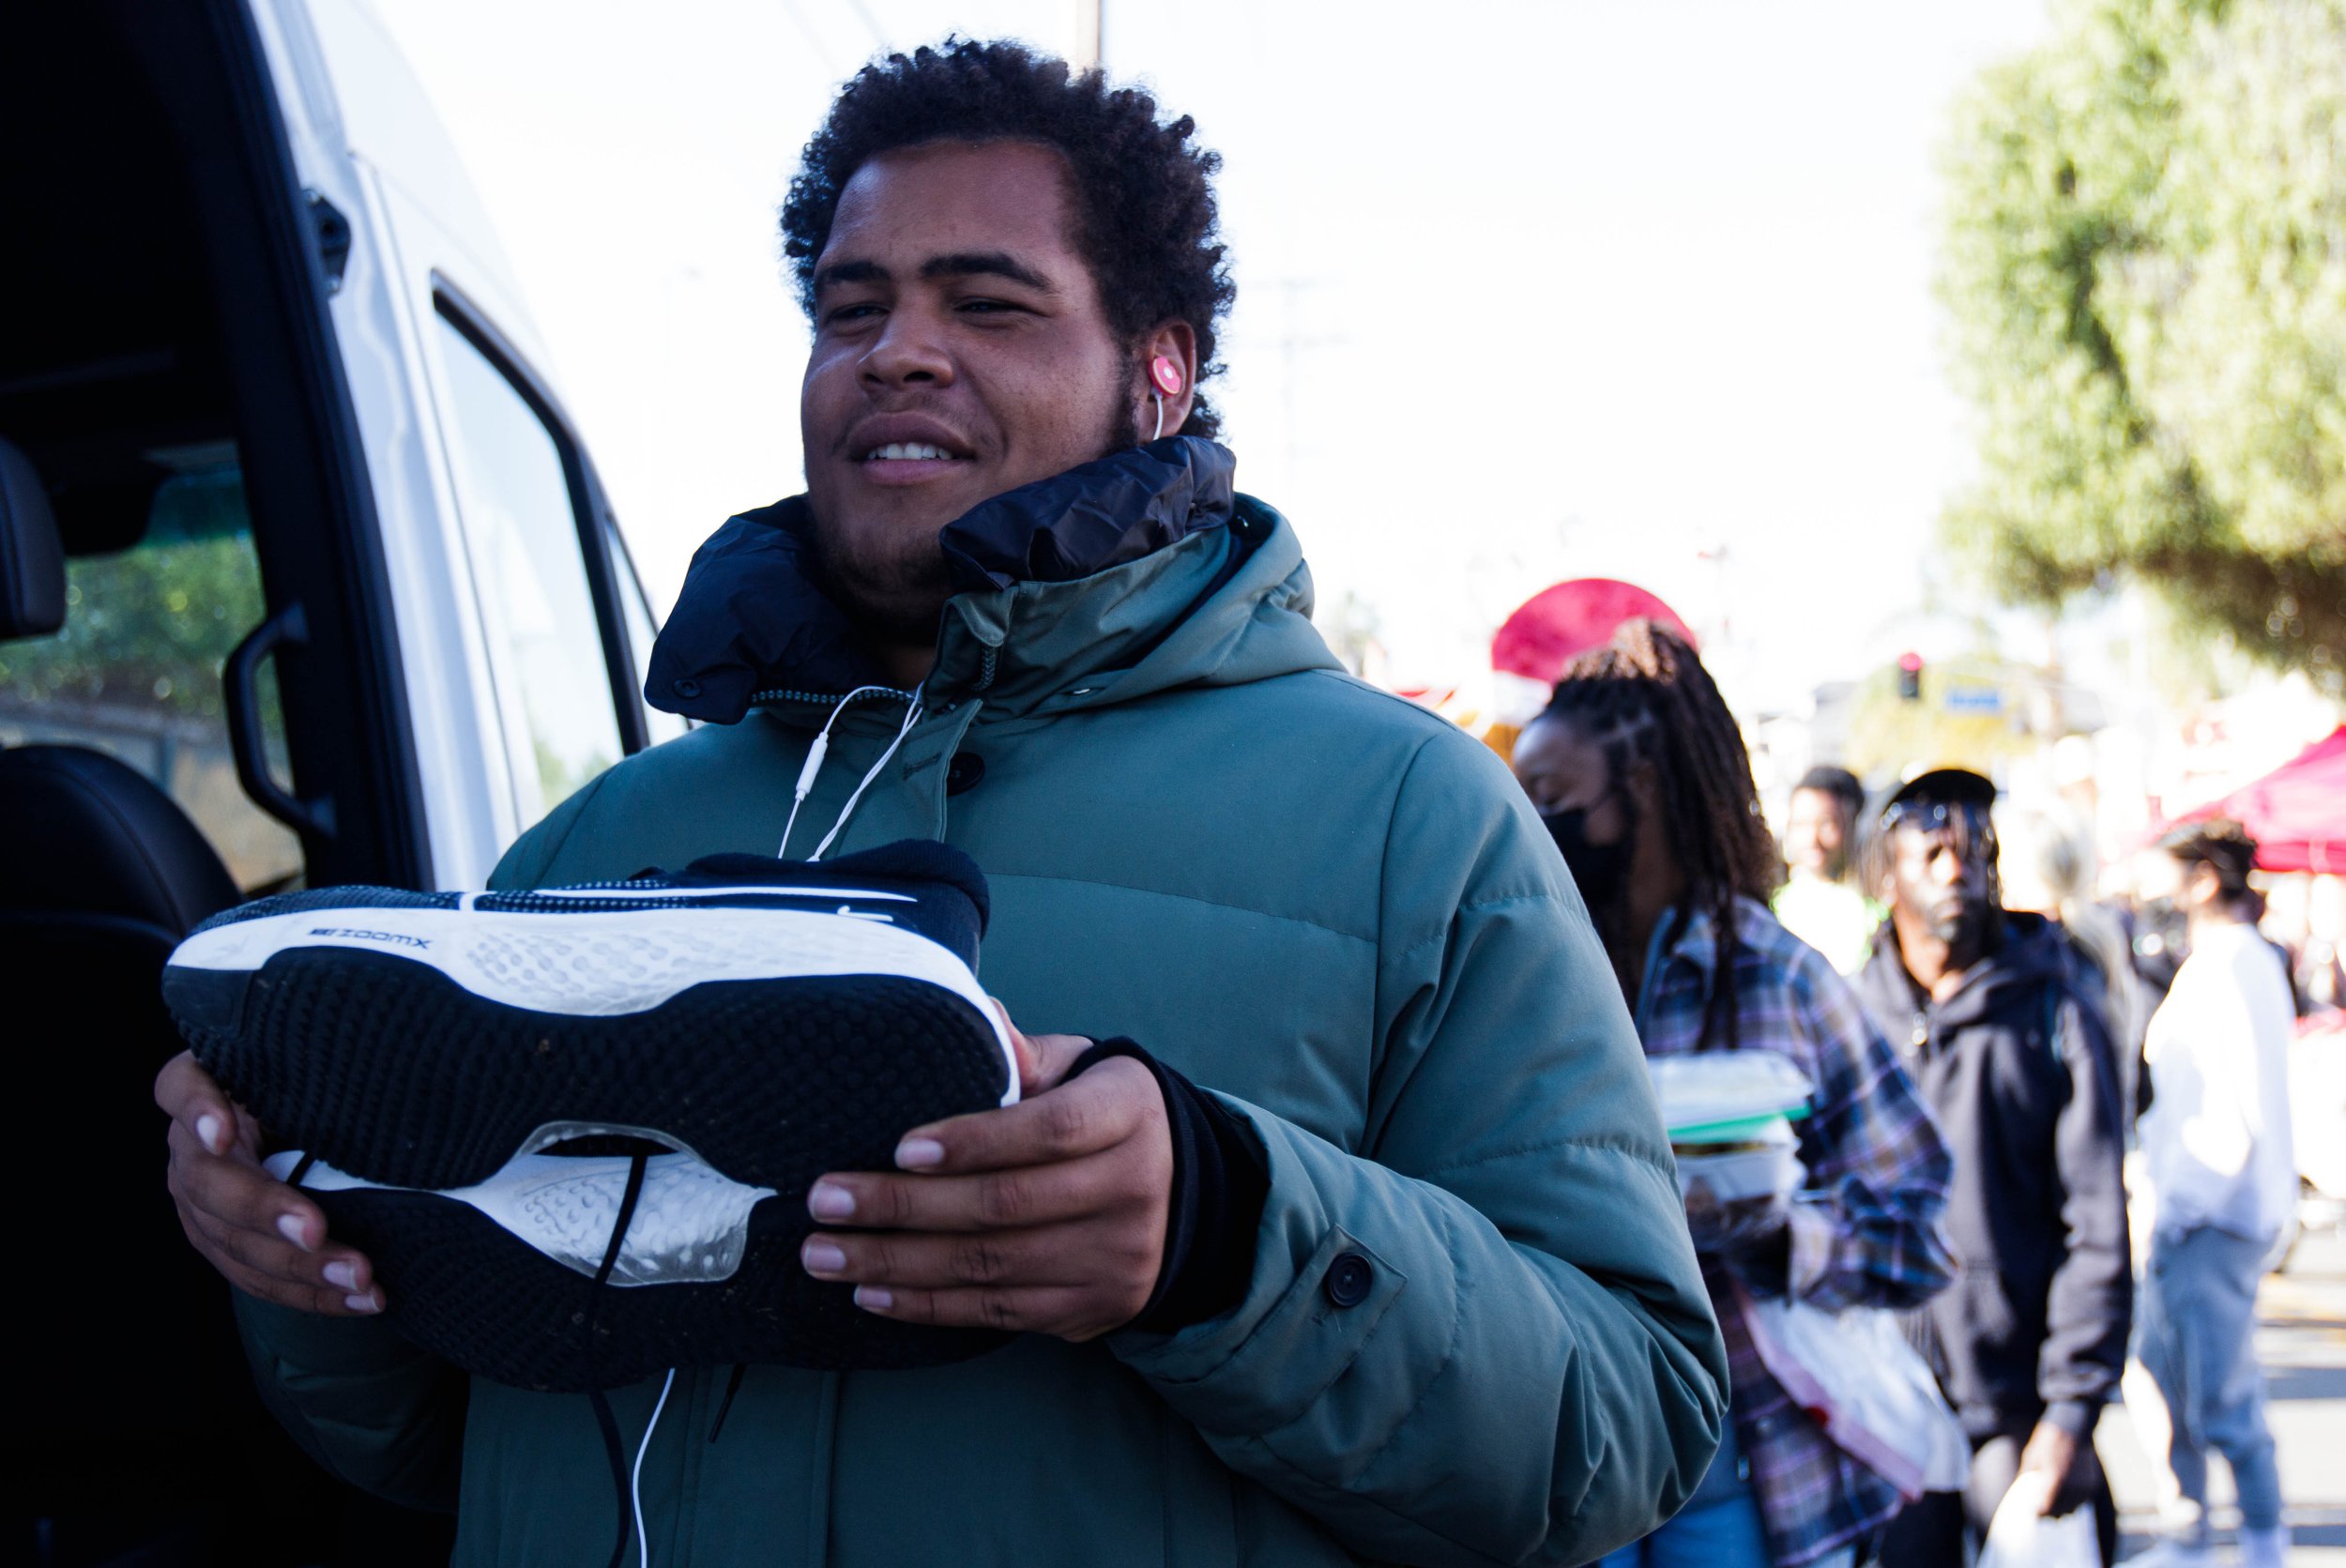  David Vales receives a new pair of shoes at the Lost Angels Org Thanksgiving event. For the past 10 years, the Los Angeles based non profit, Lost Angels Org has been been giving out food and utilities to the homeless in Venice on Thanksgiving Day. N